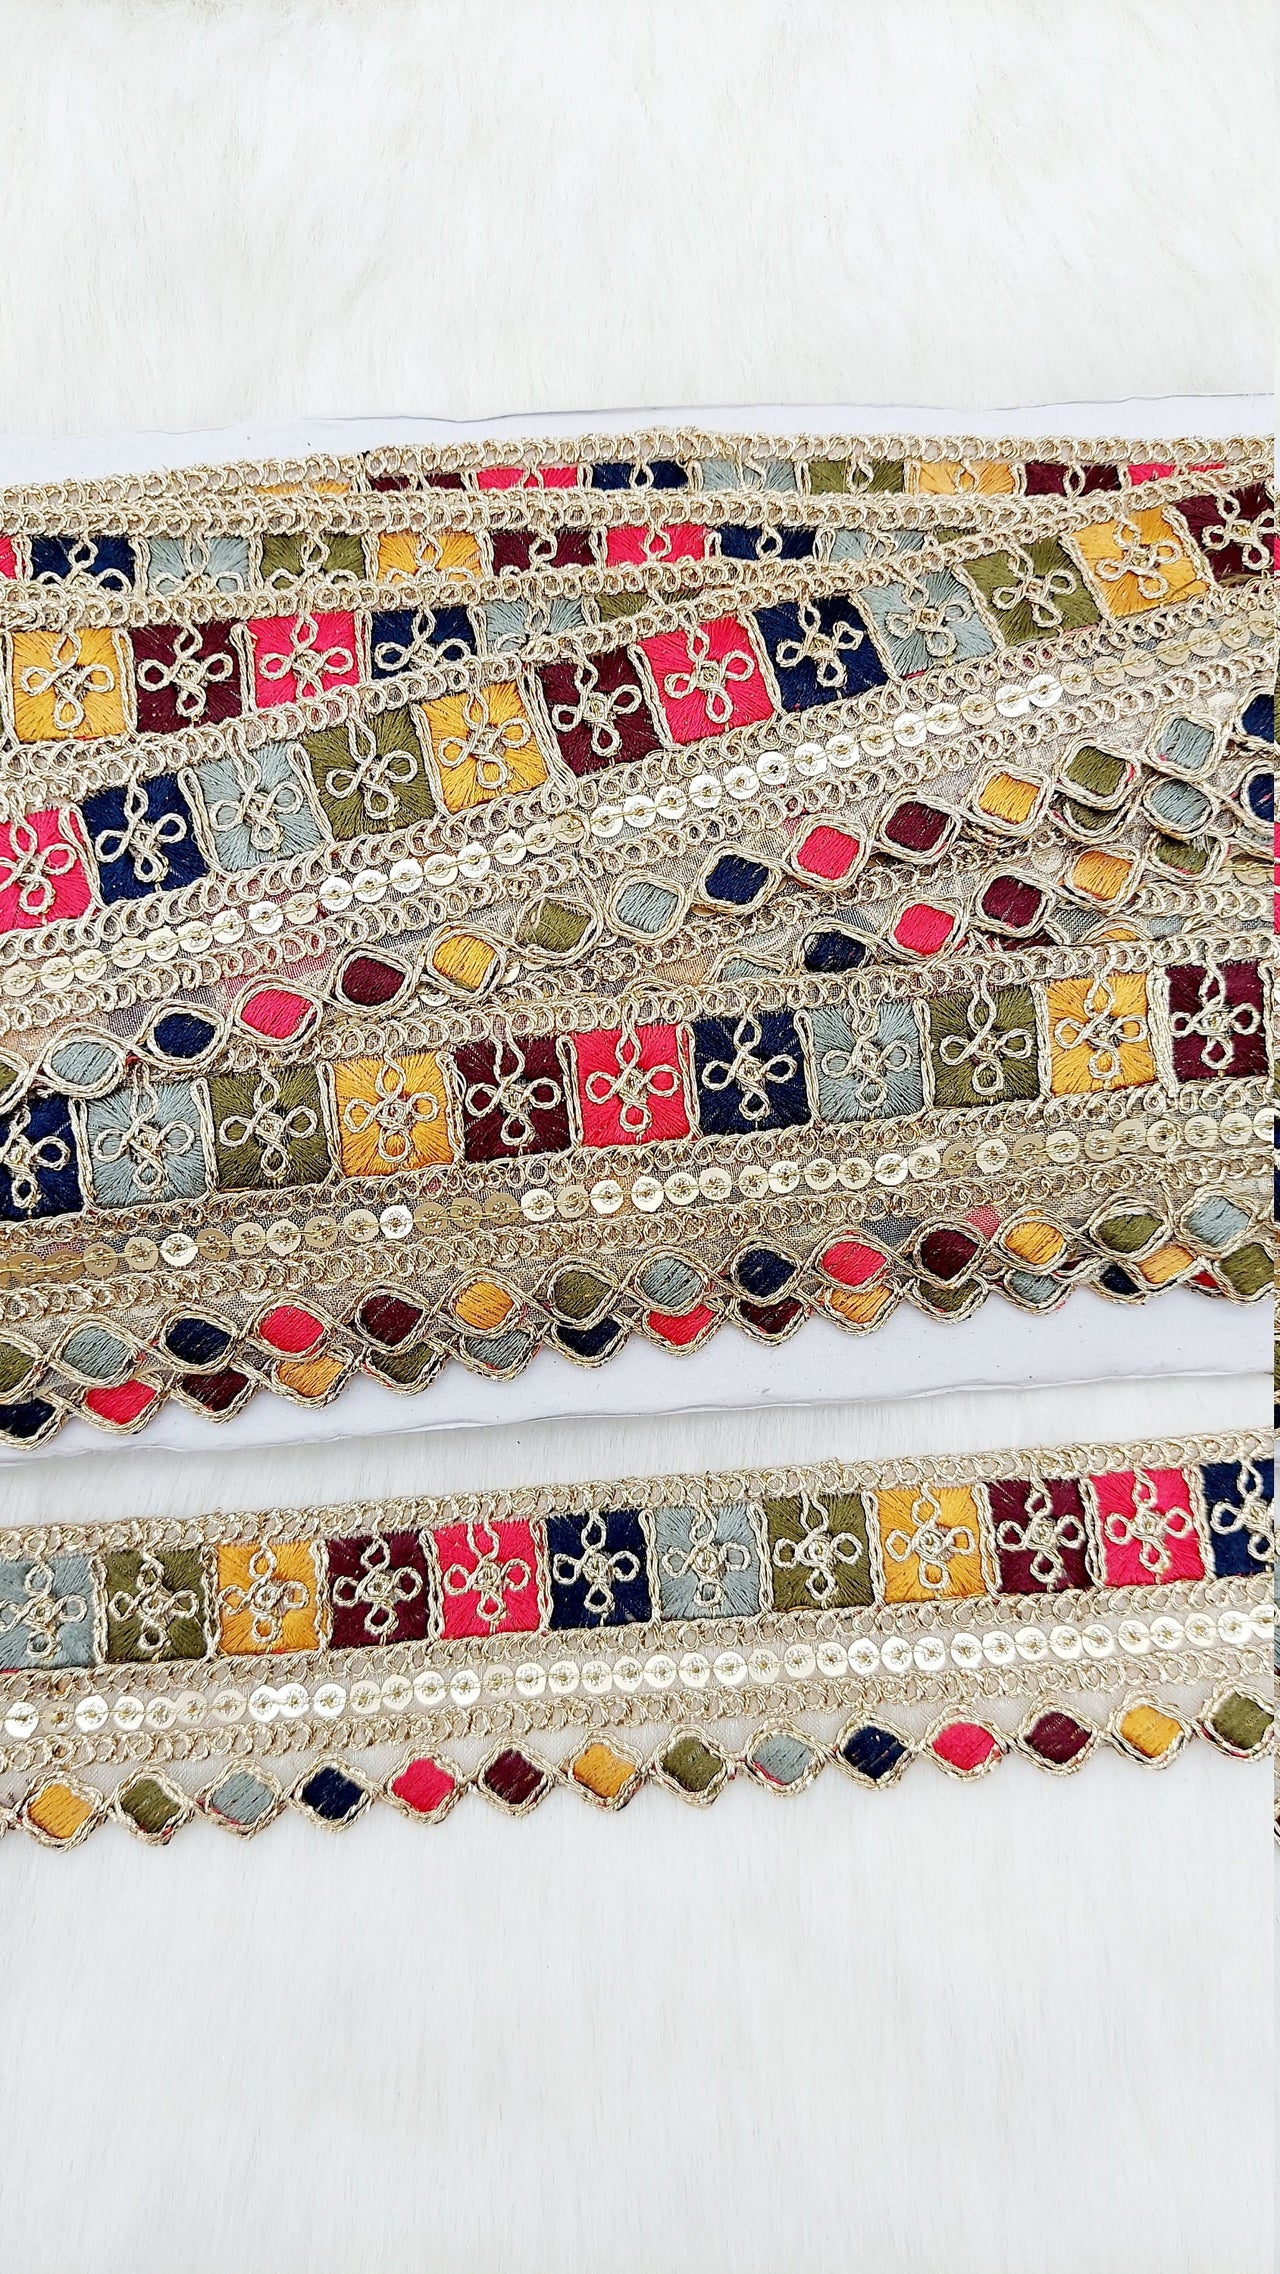 Gold Sequin Border With Multicoloured Floral Embroidery, Beige Shimmer Lace Trim, Decorative Trim